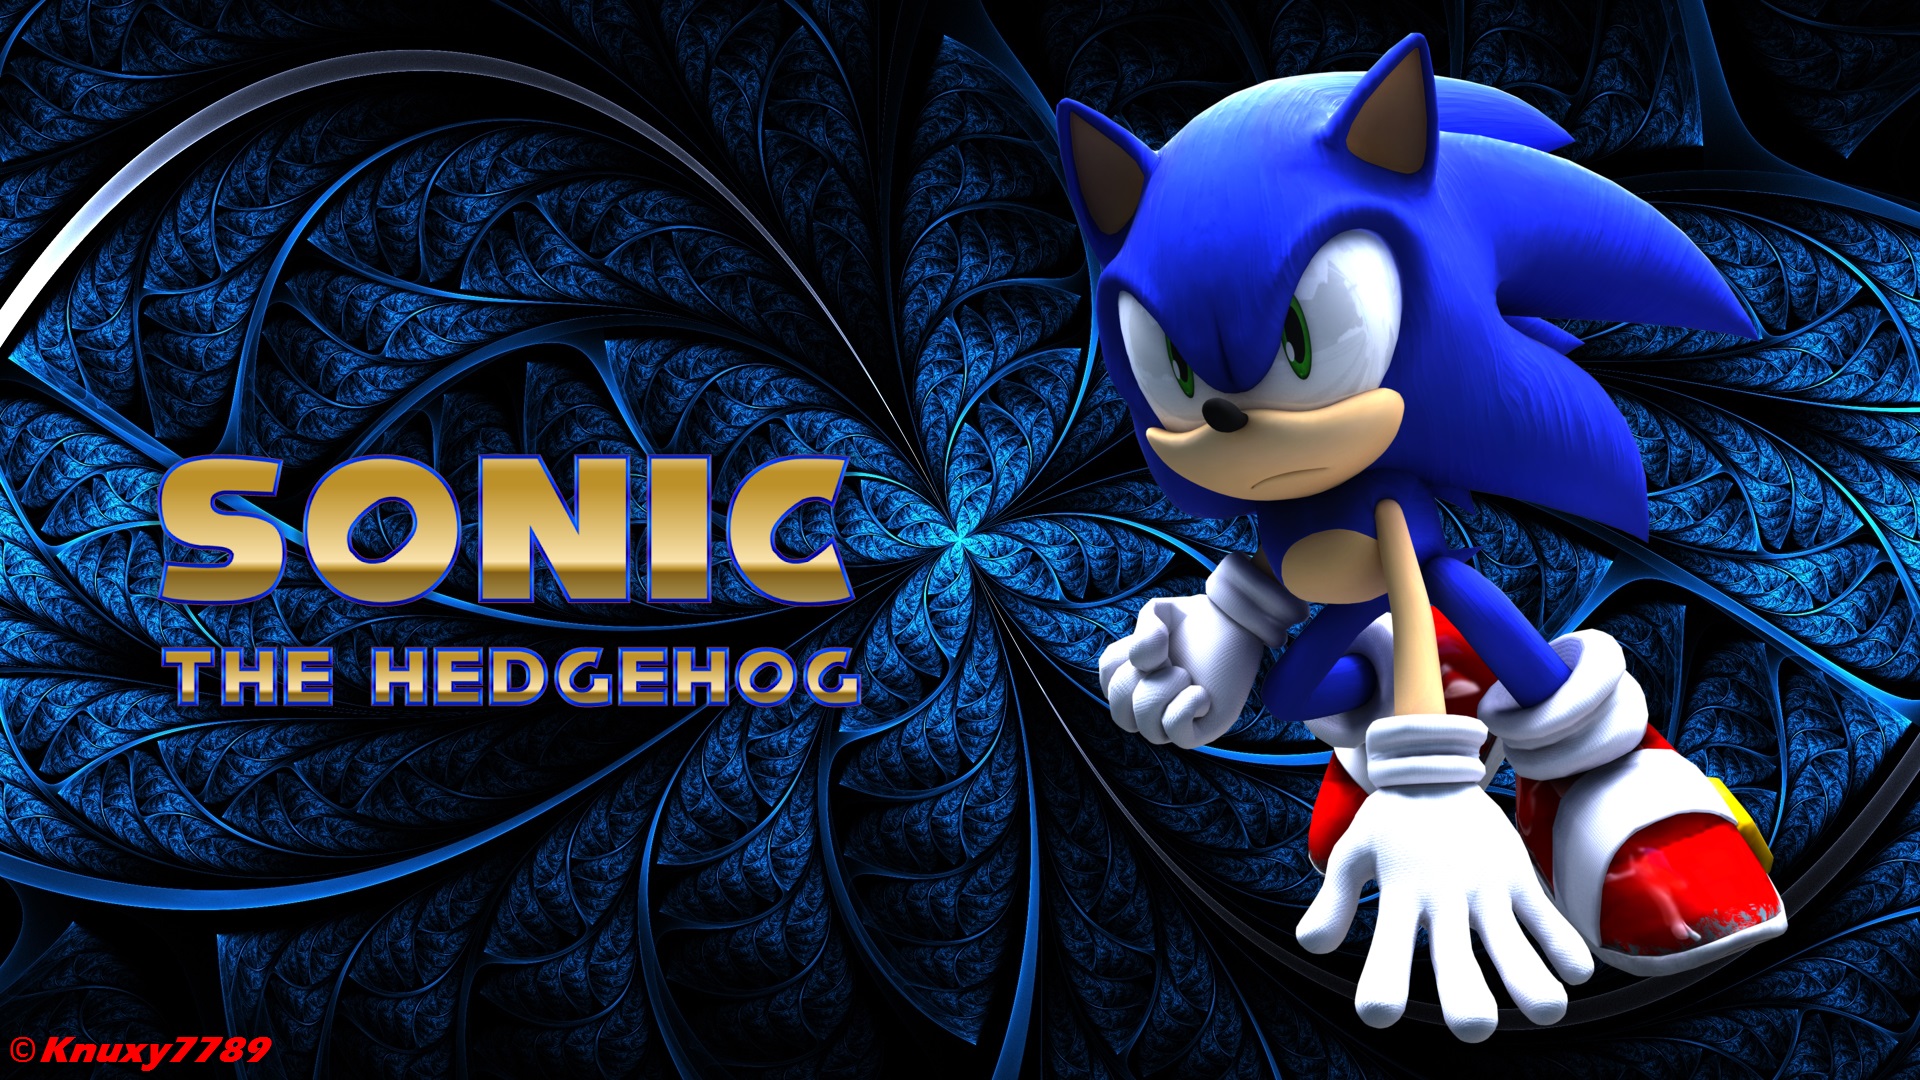 Sonic the Hedgehog   Wallpaper[3] by Knuxy7789 on